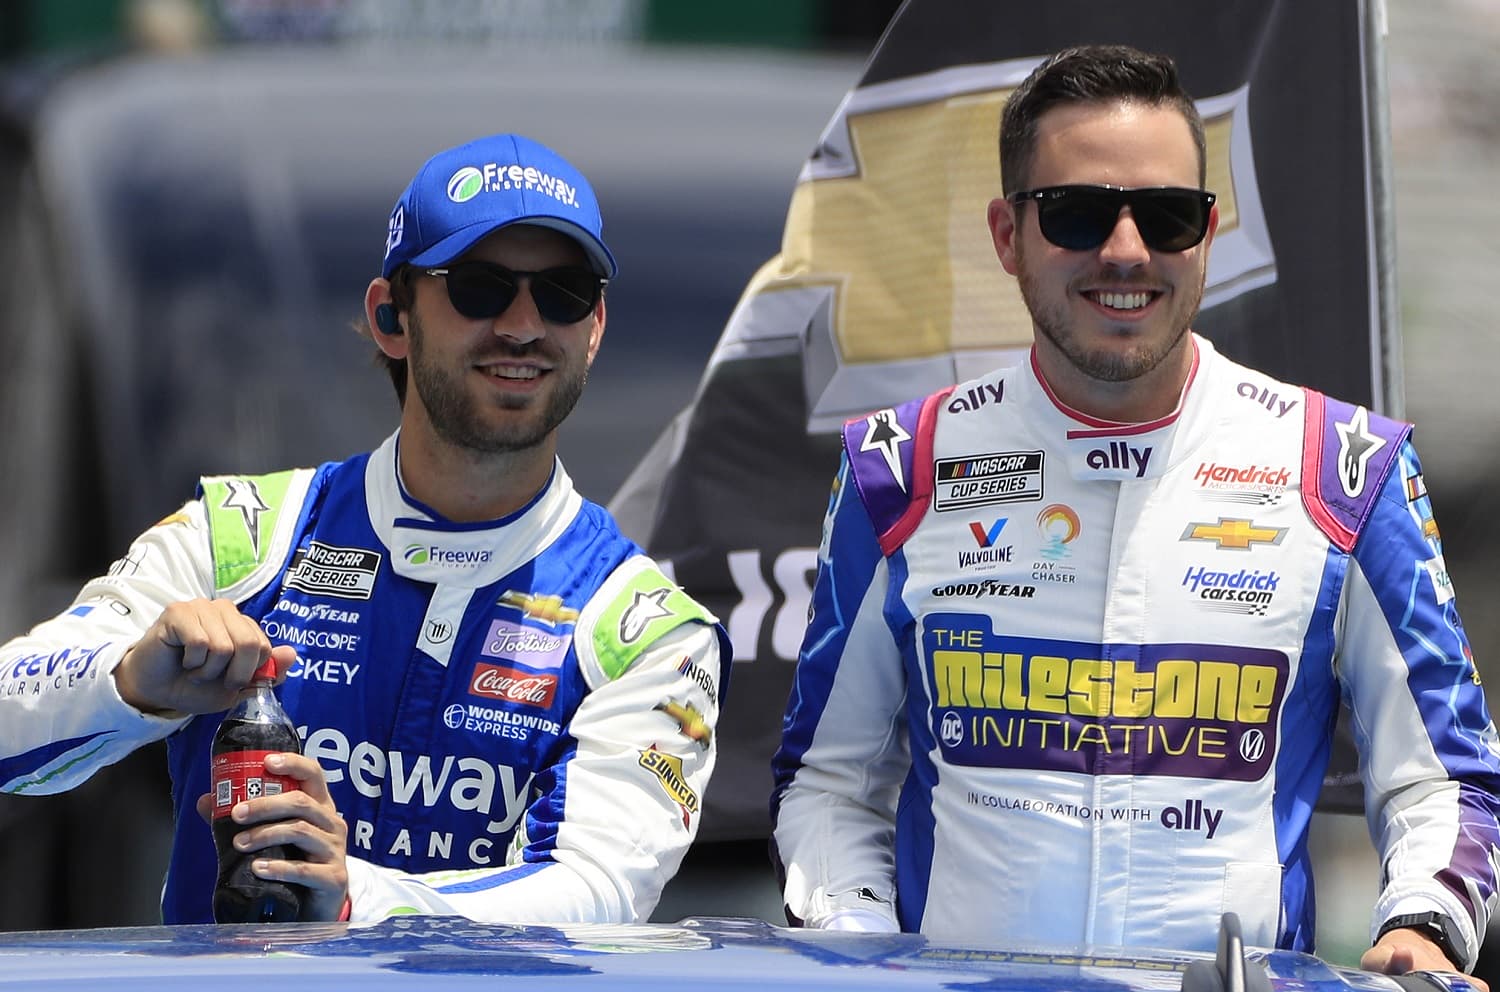 Daniel Suarez and Alex Bowman during driver intros before the Quaker State 400 NASCAR race on July 10, 2022 at the Atlanta Motor Speedway. | David J. Griffin/Icon Sportswire via Getty Images